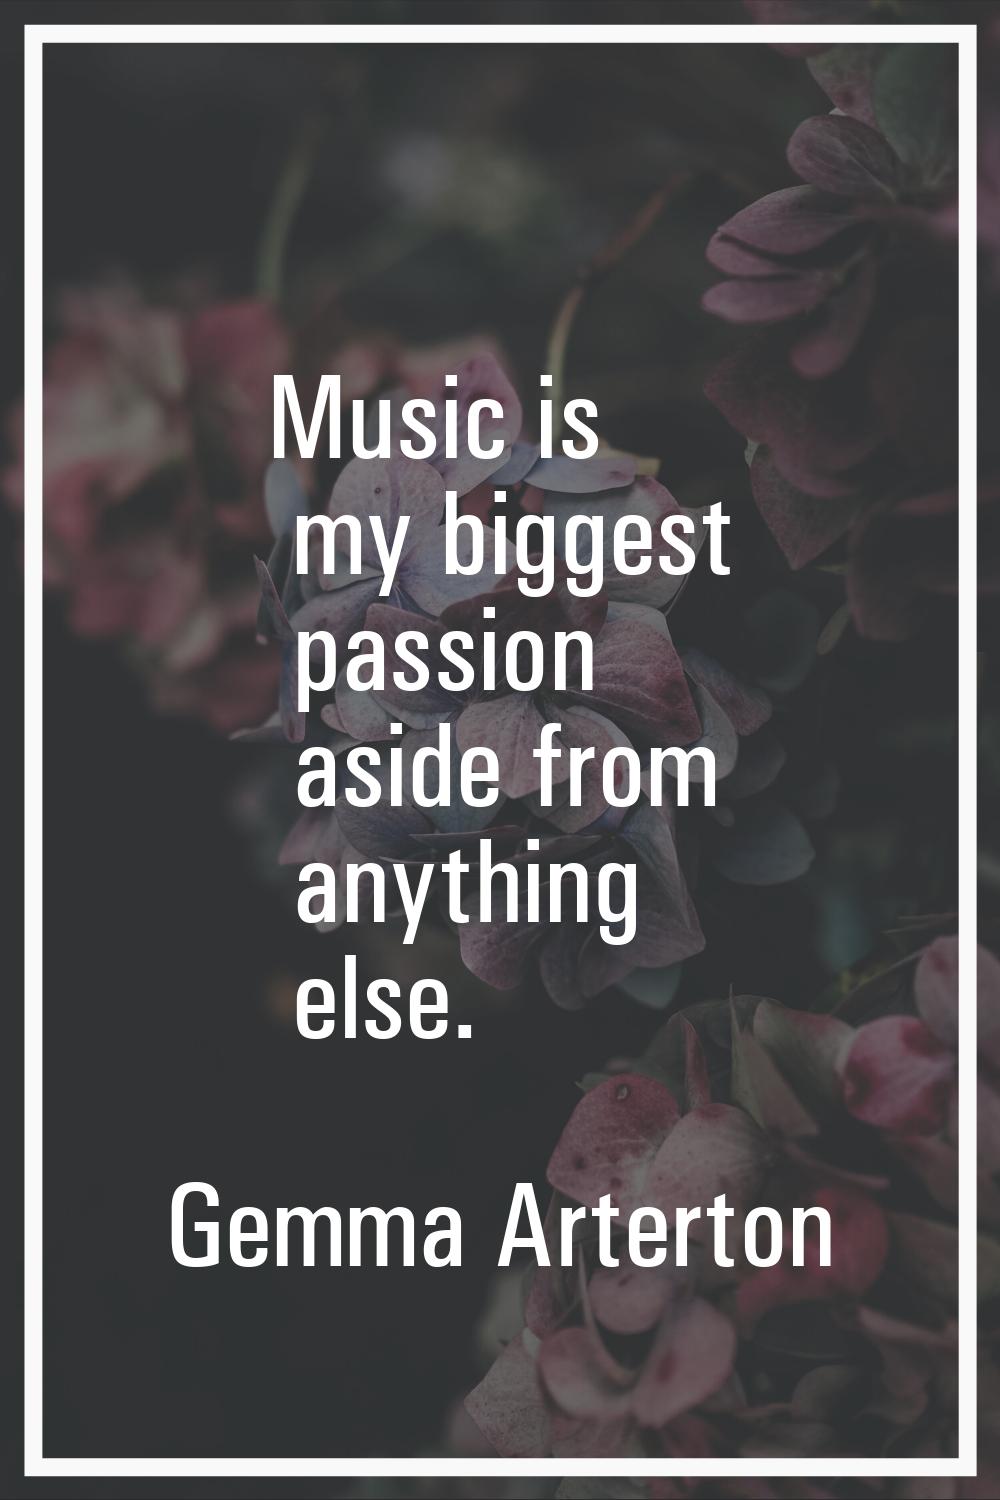 Music is my biggest passion aside from anything else.